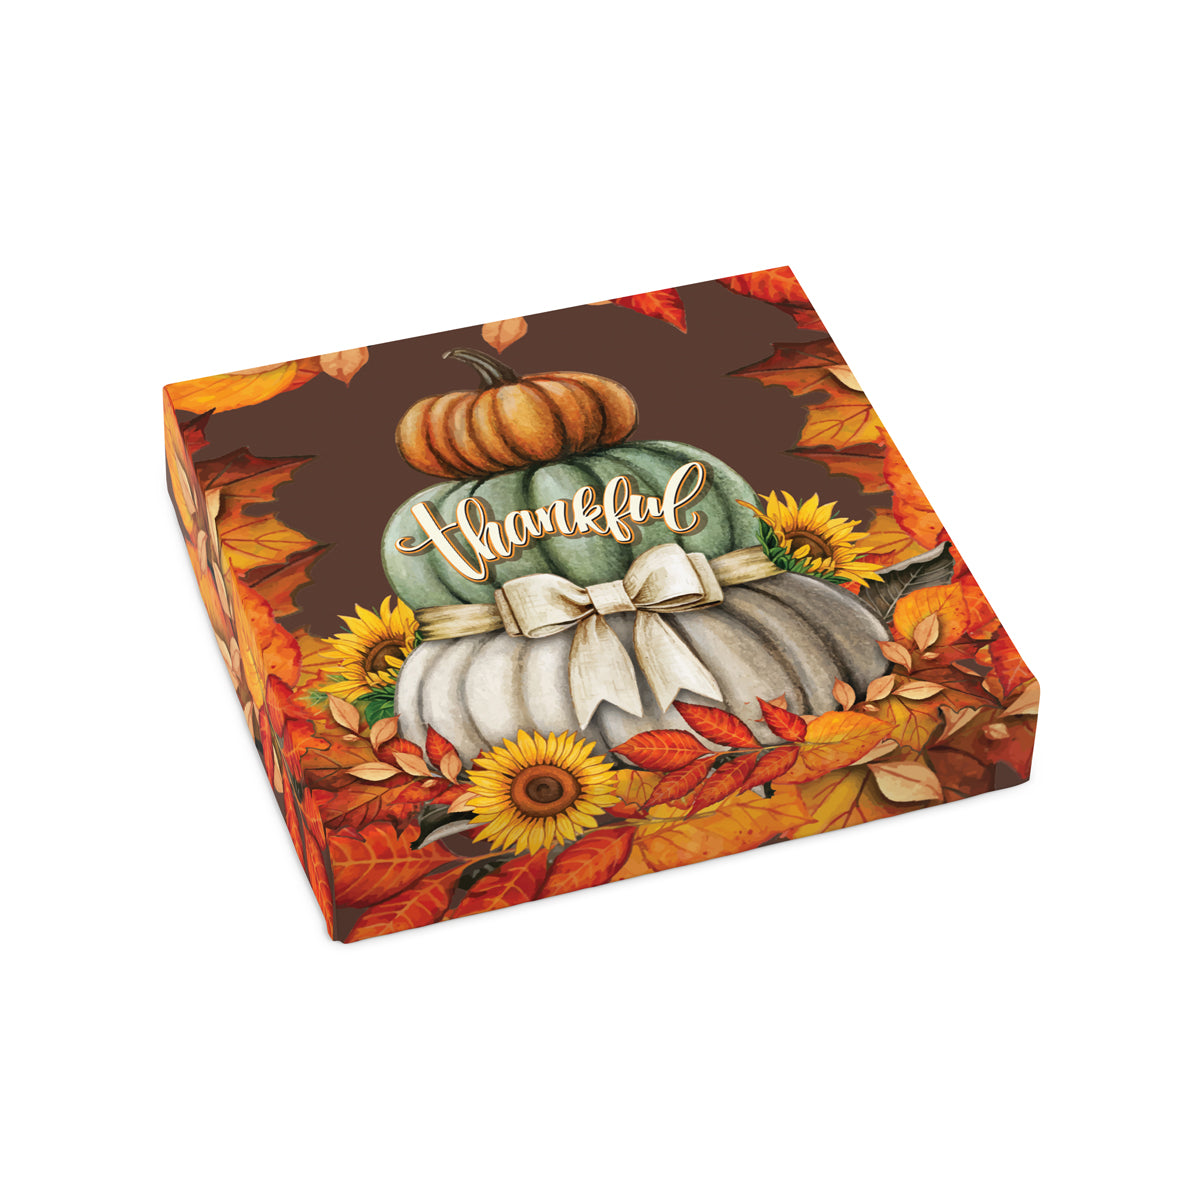 Thankful Autumn Stacked Pumpkins Cover for 9 Piece Chocolate Assortment